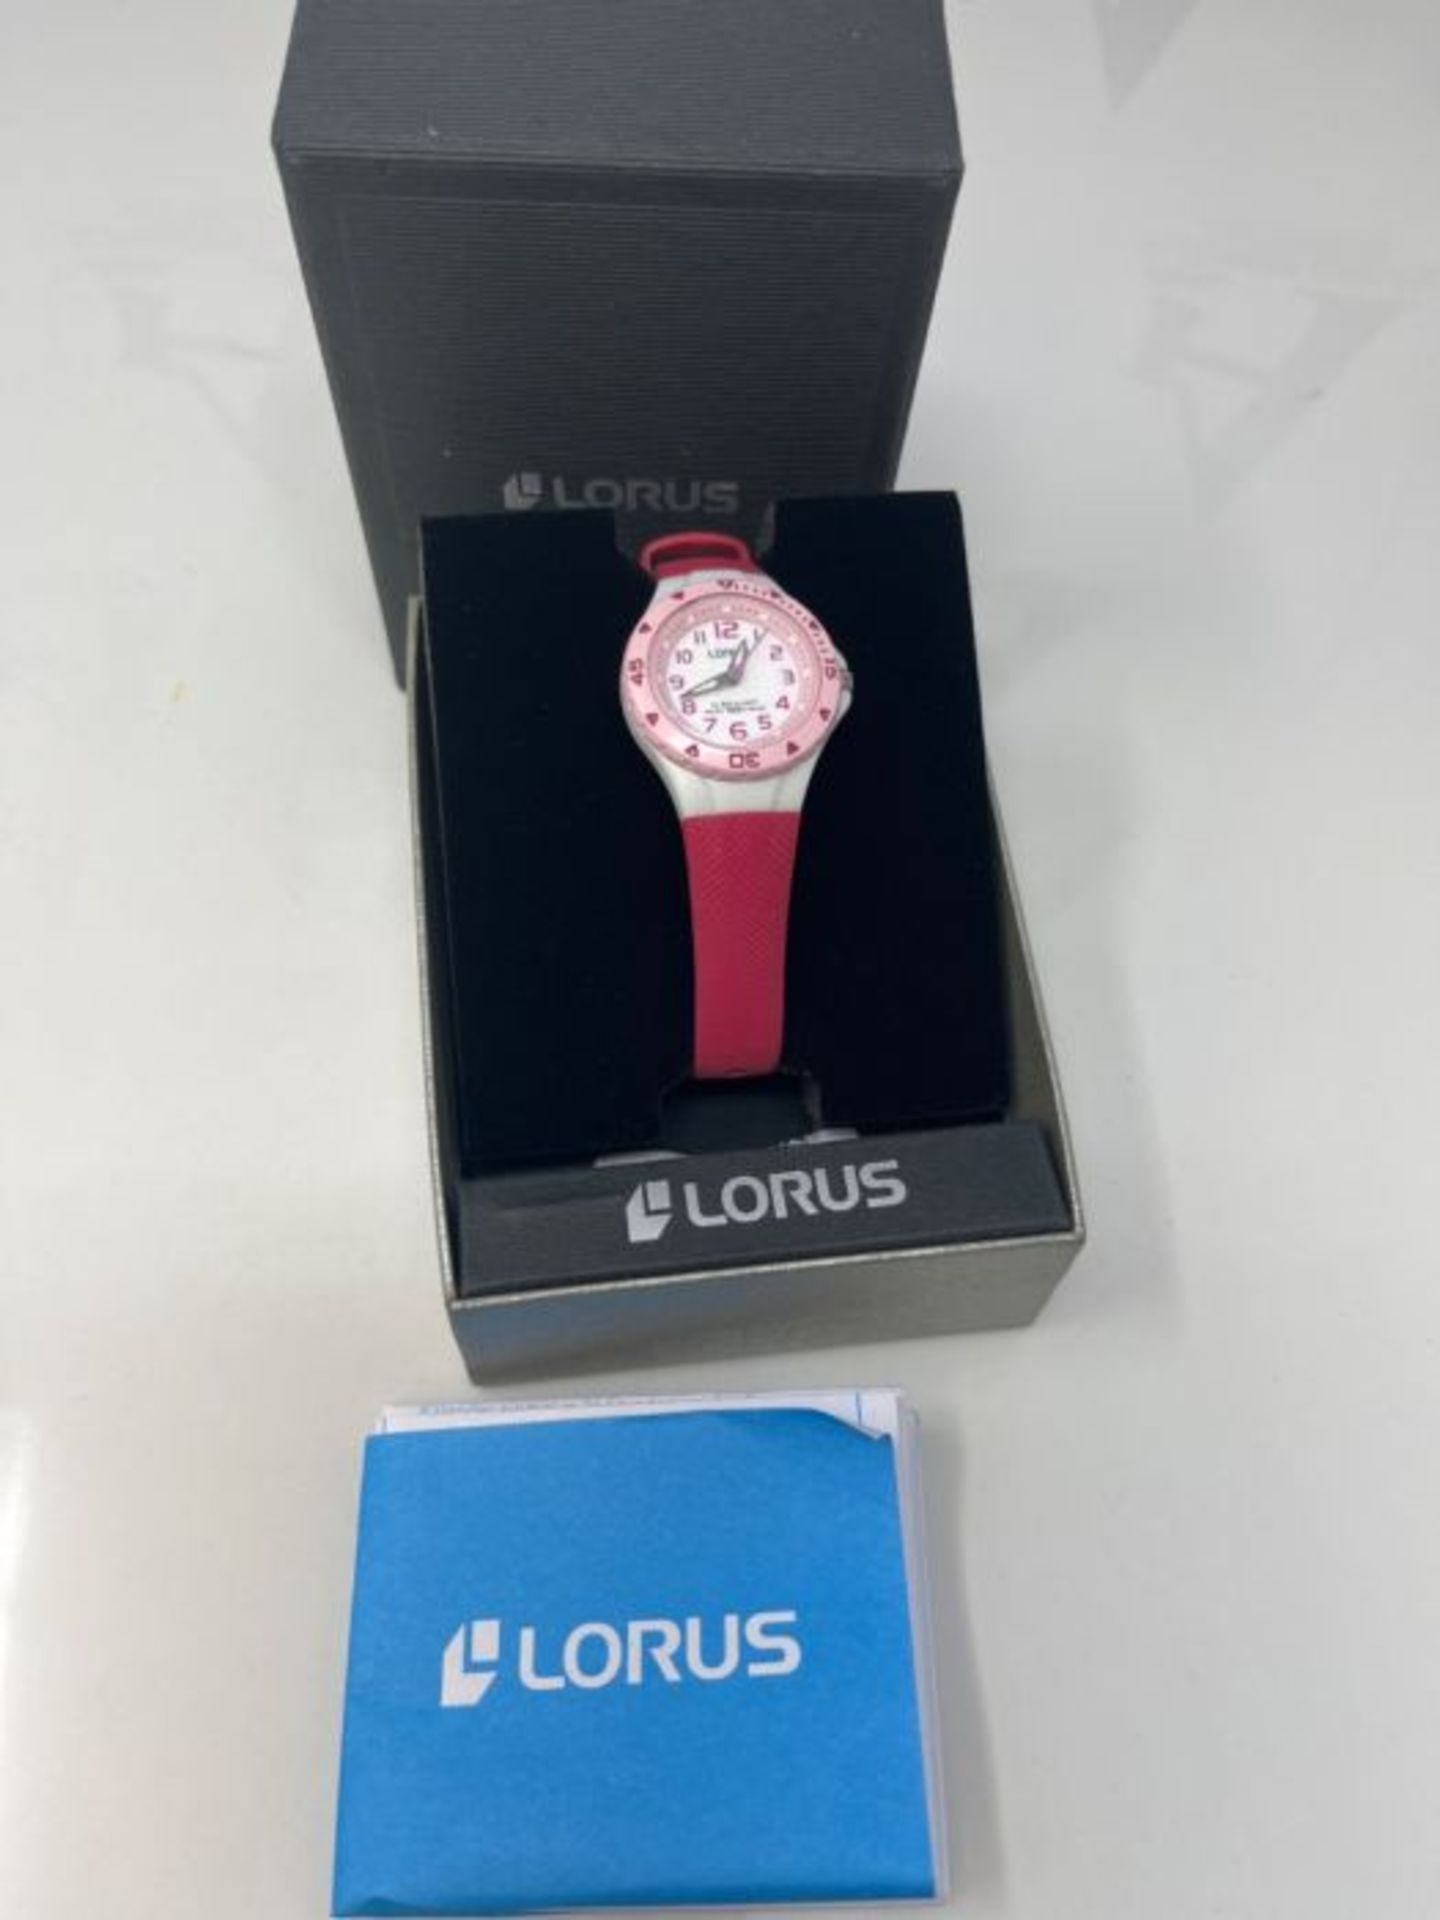 Lorus Girls' Analogue Quartz Watch with Silicone Strap R2339DX9 - Image 3 of 3